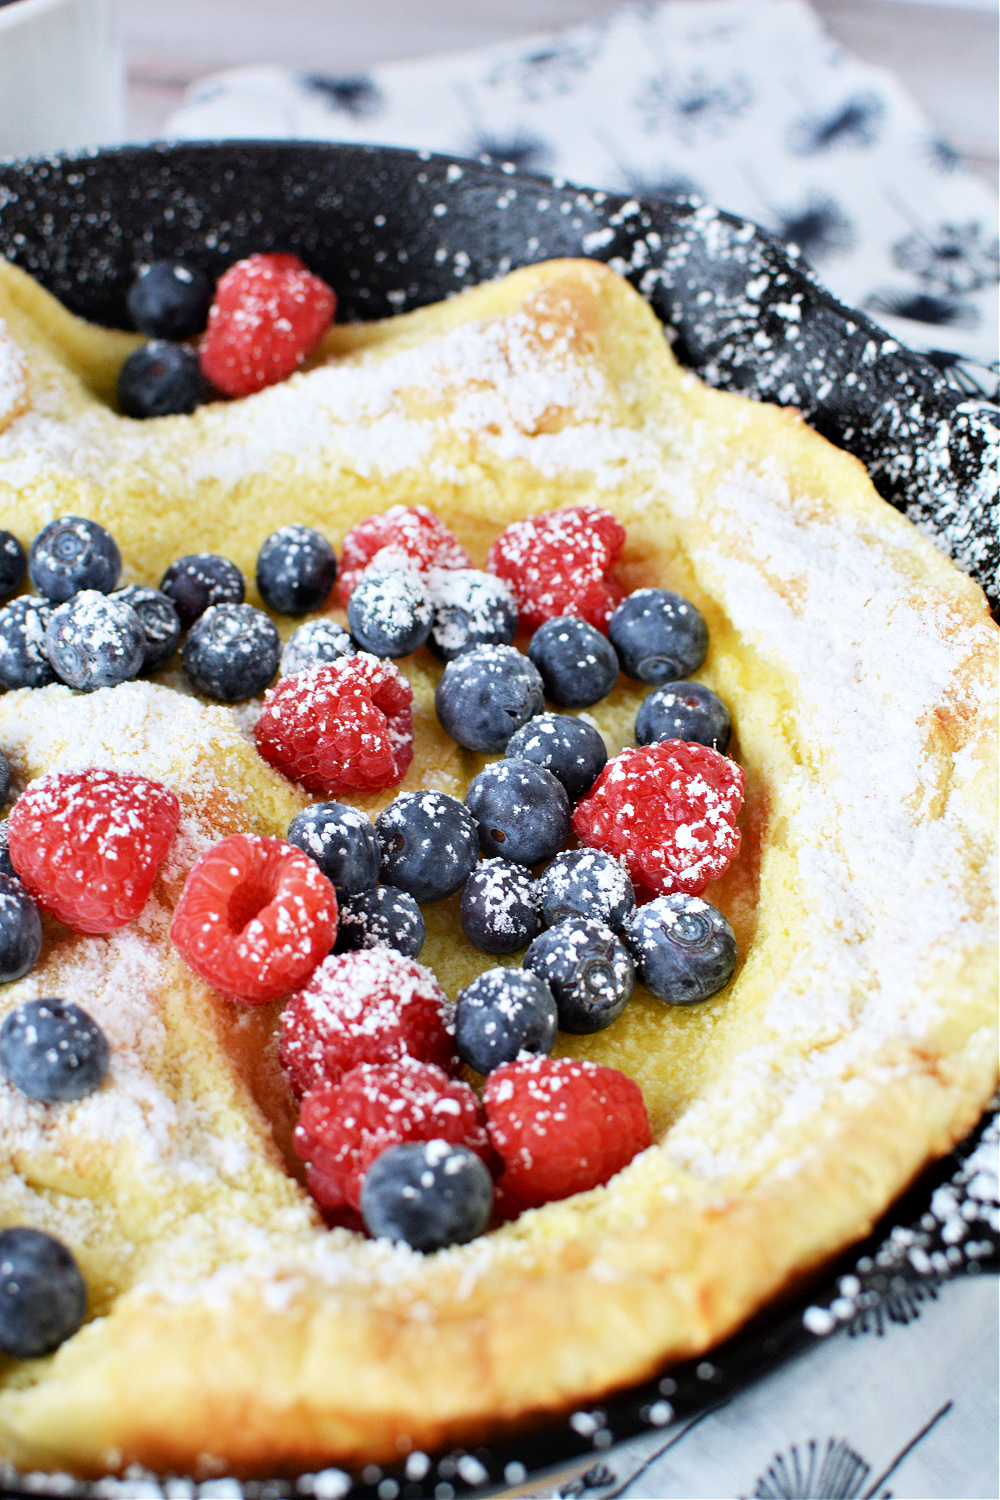 Puffed Pancake sprinkled with powdered sugar and covered with fresh berries